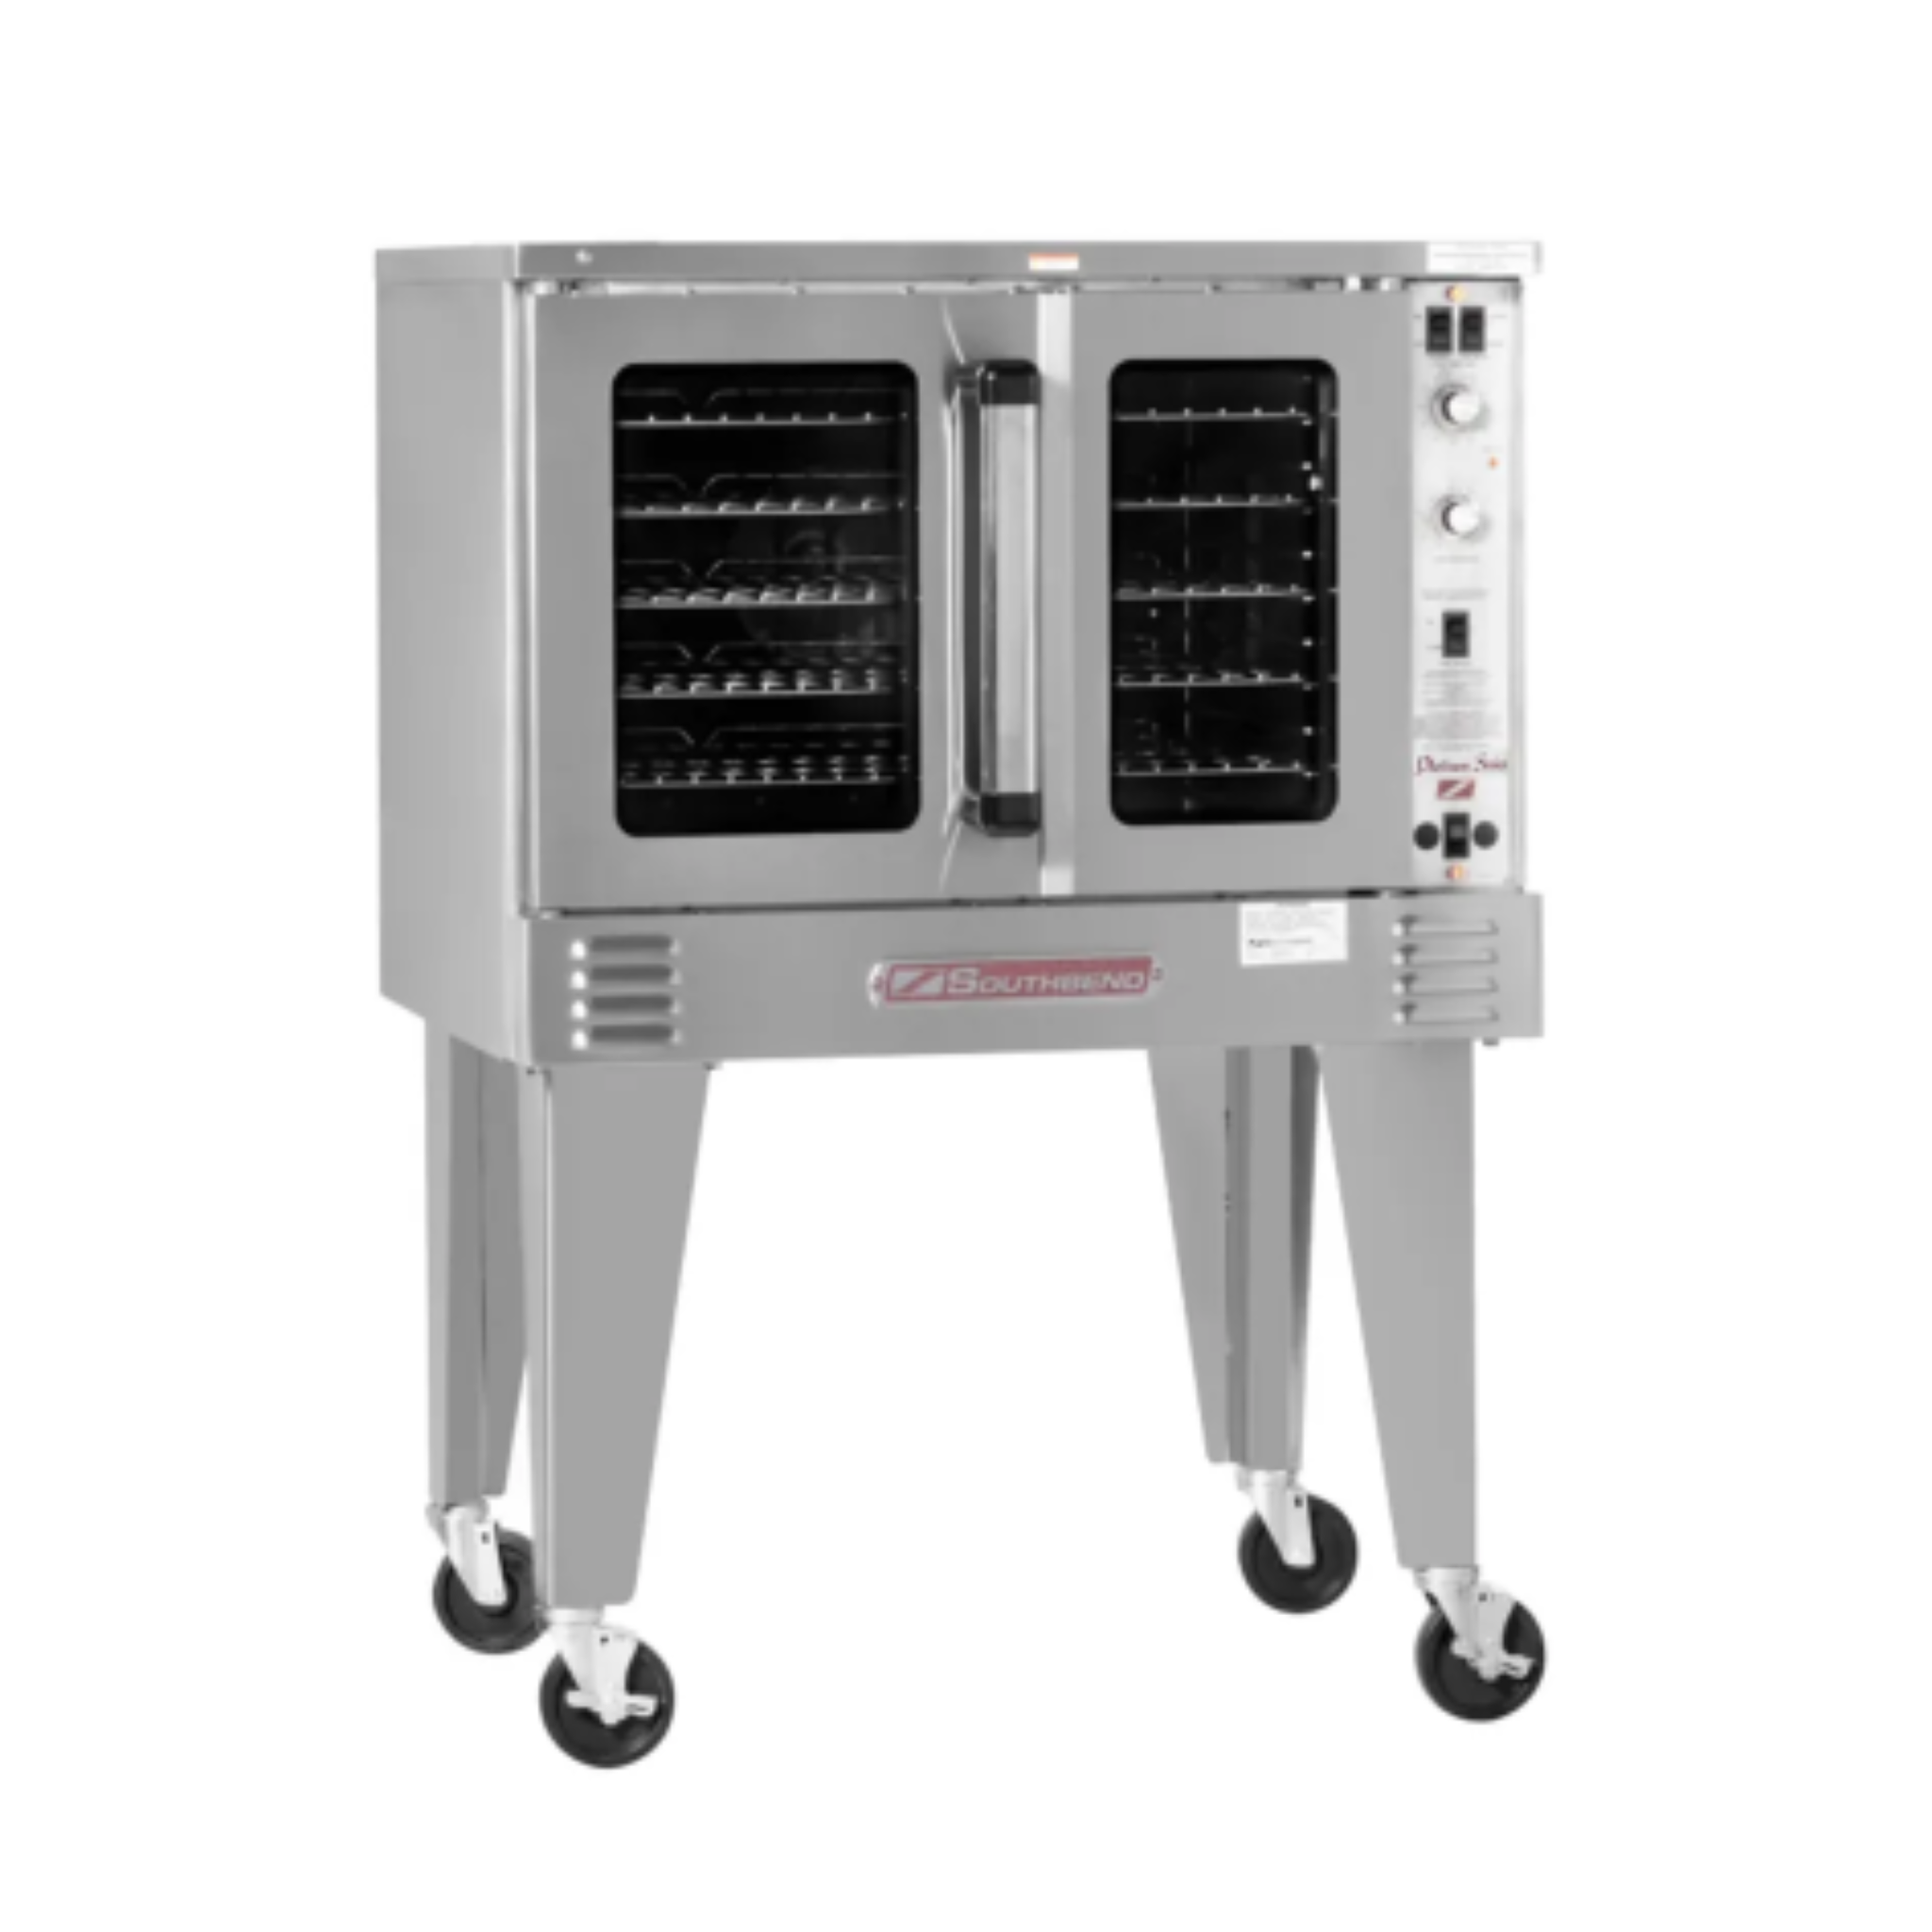 Southbend PCE75B/SI Platinum Bakery Depth Single Full Size Convection Oven - 7.5kW, 240v/3ph